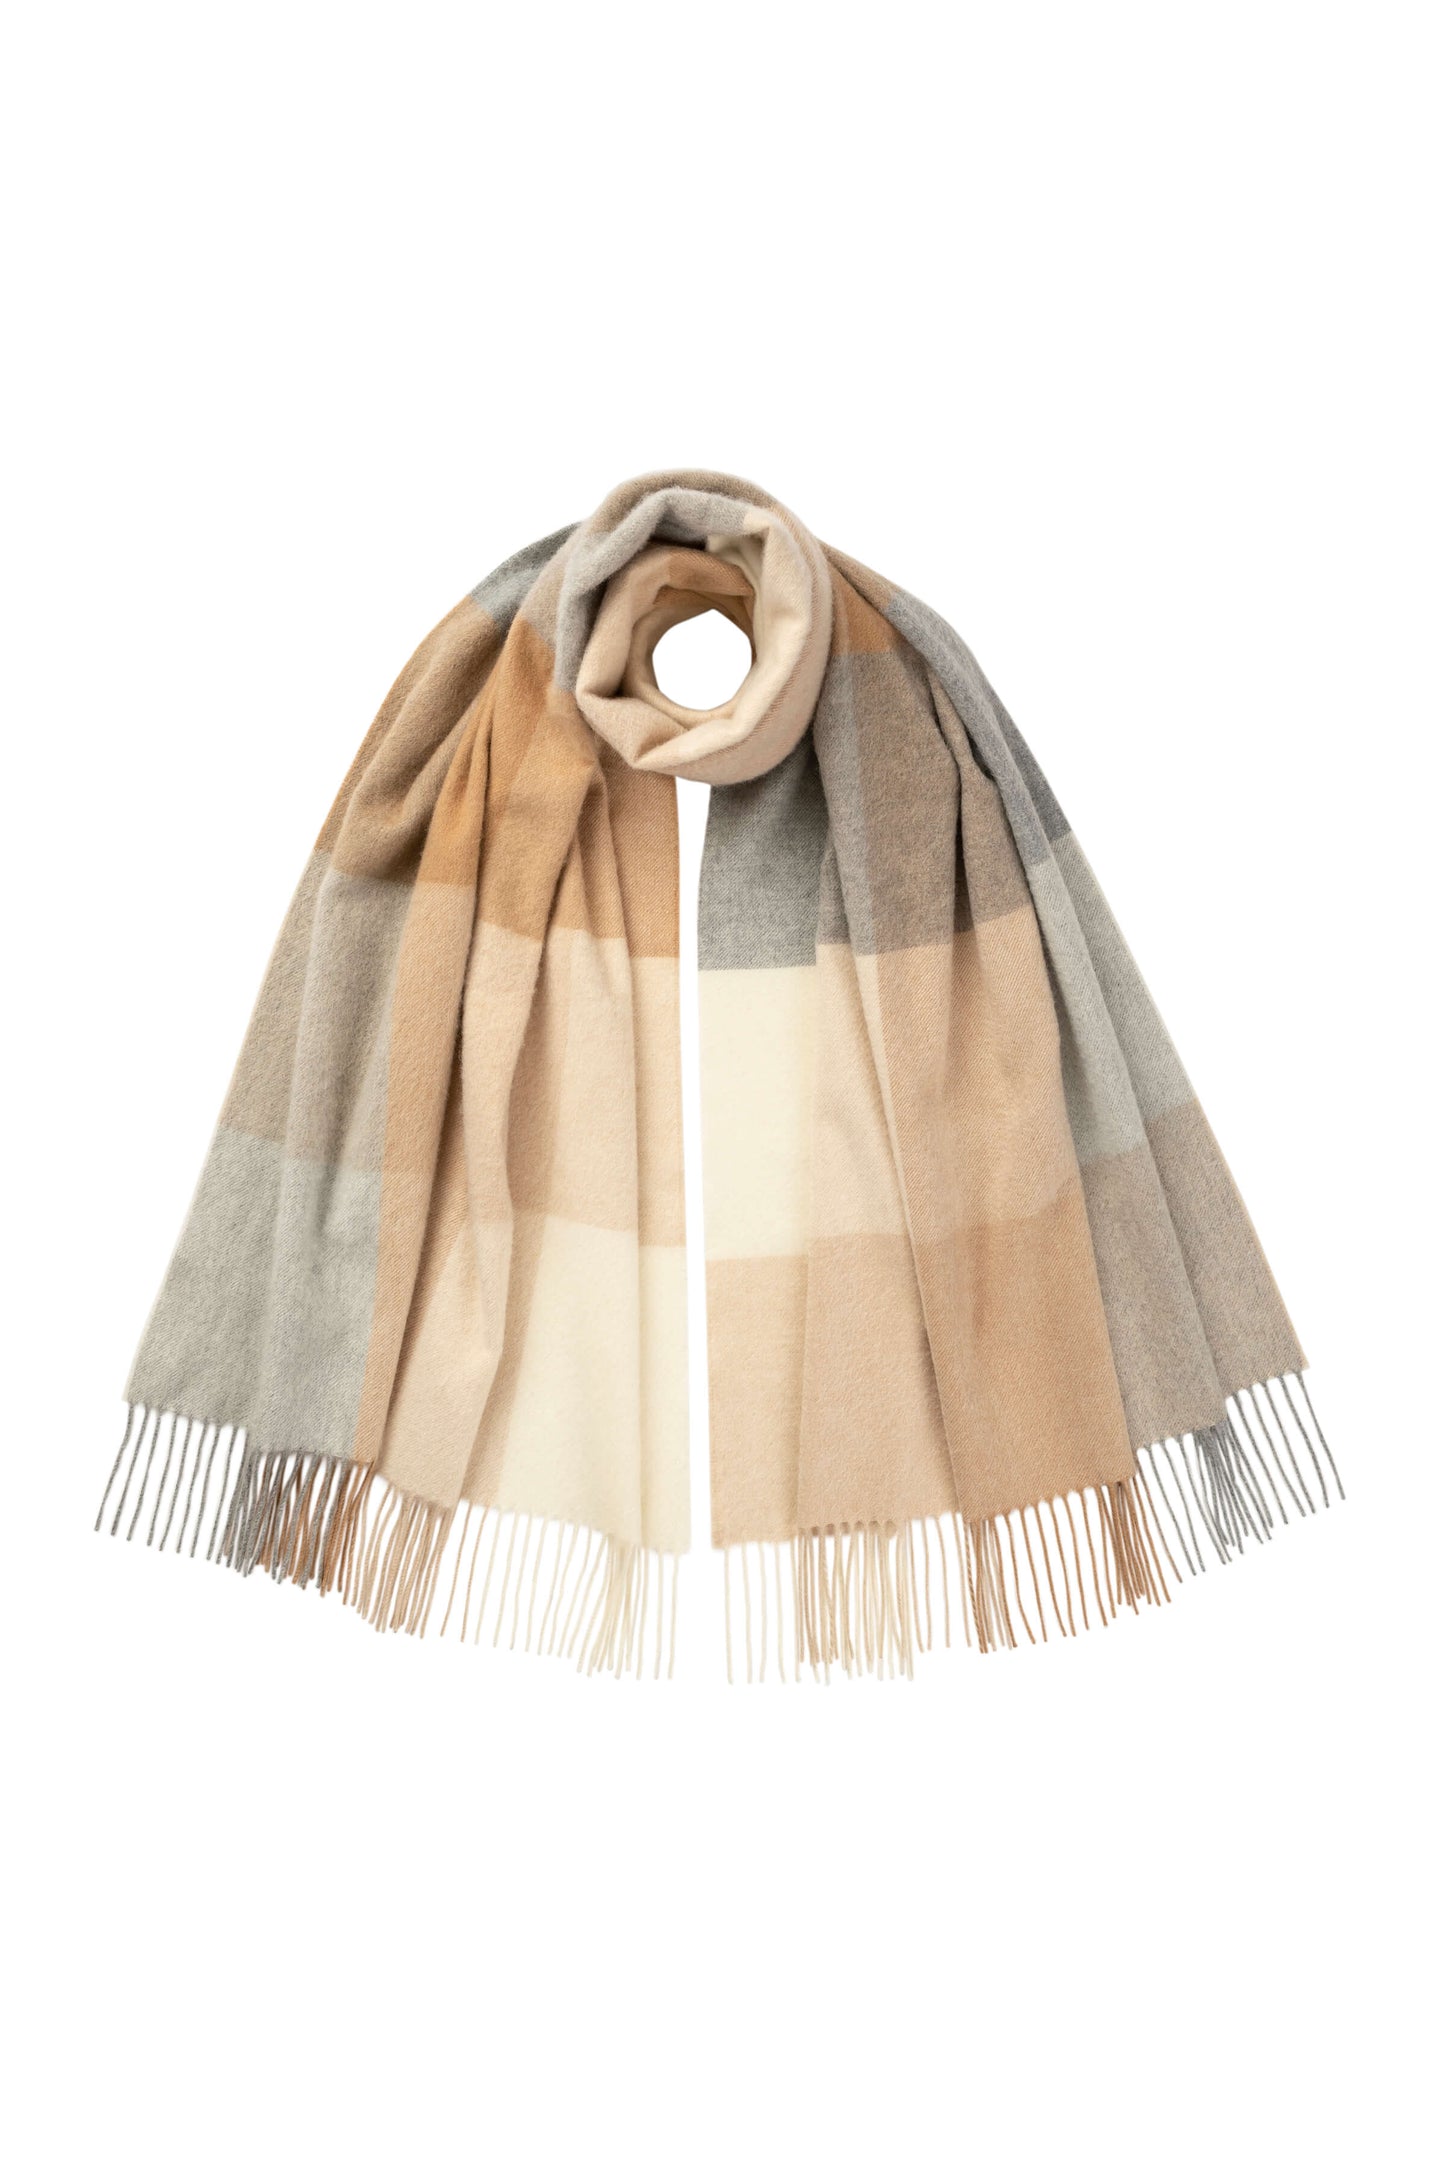 Johnstons of Elgin Block Check Cashmere Stole in Camel on a white background WA000056RU7336ONE